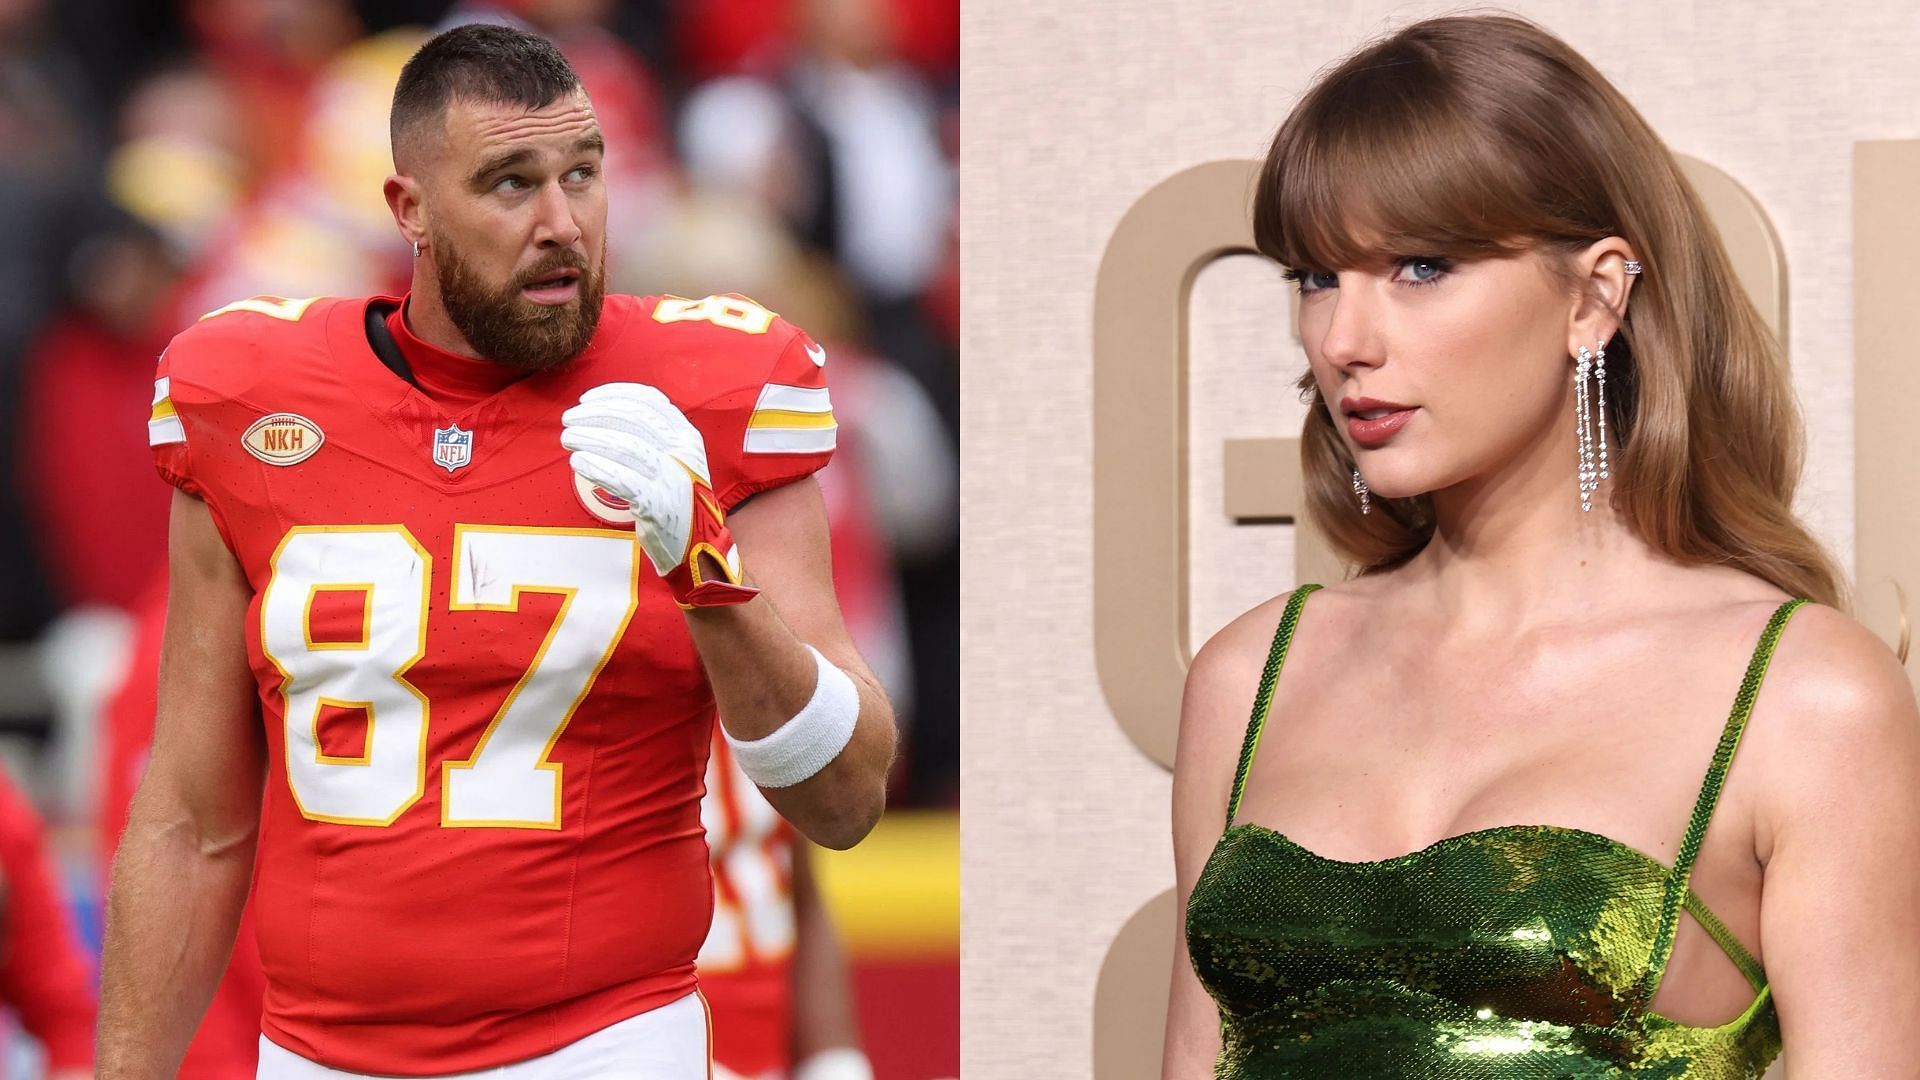 Kansas City Chiefs tight end Travis Kelce and multi-awarded pop singer Taylor Swift